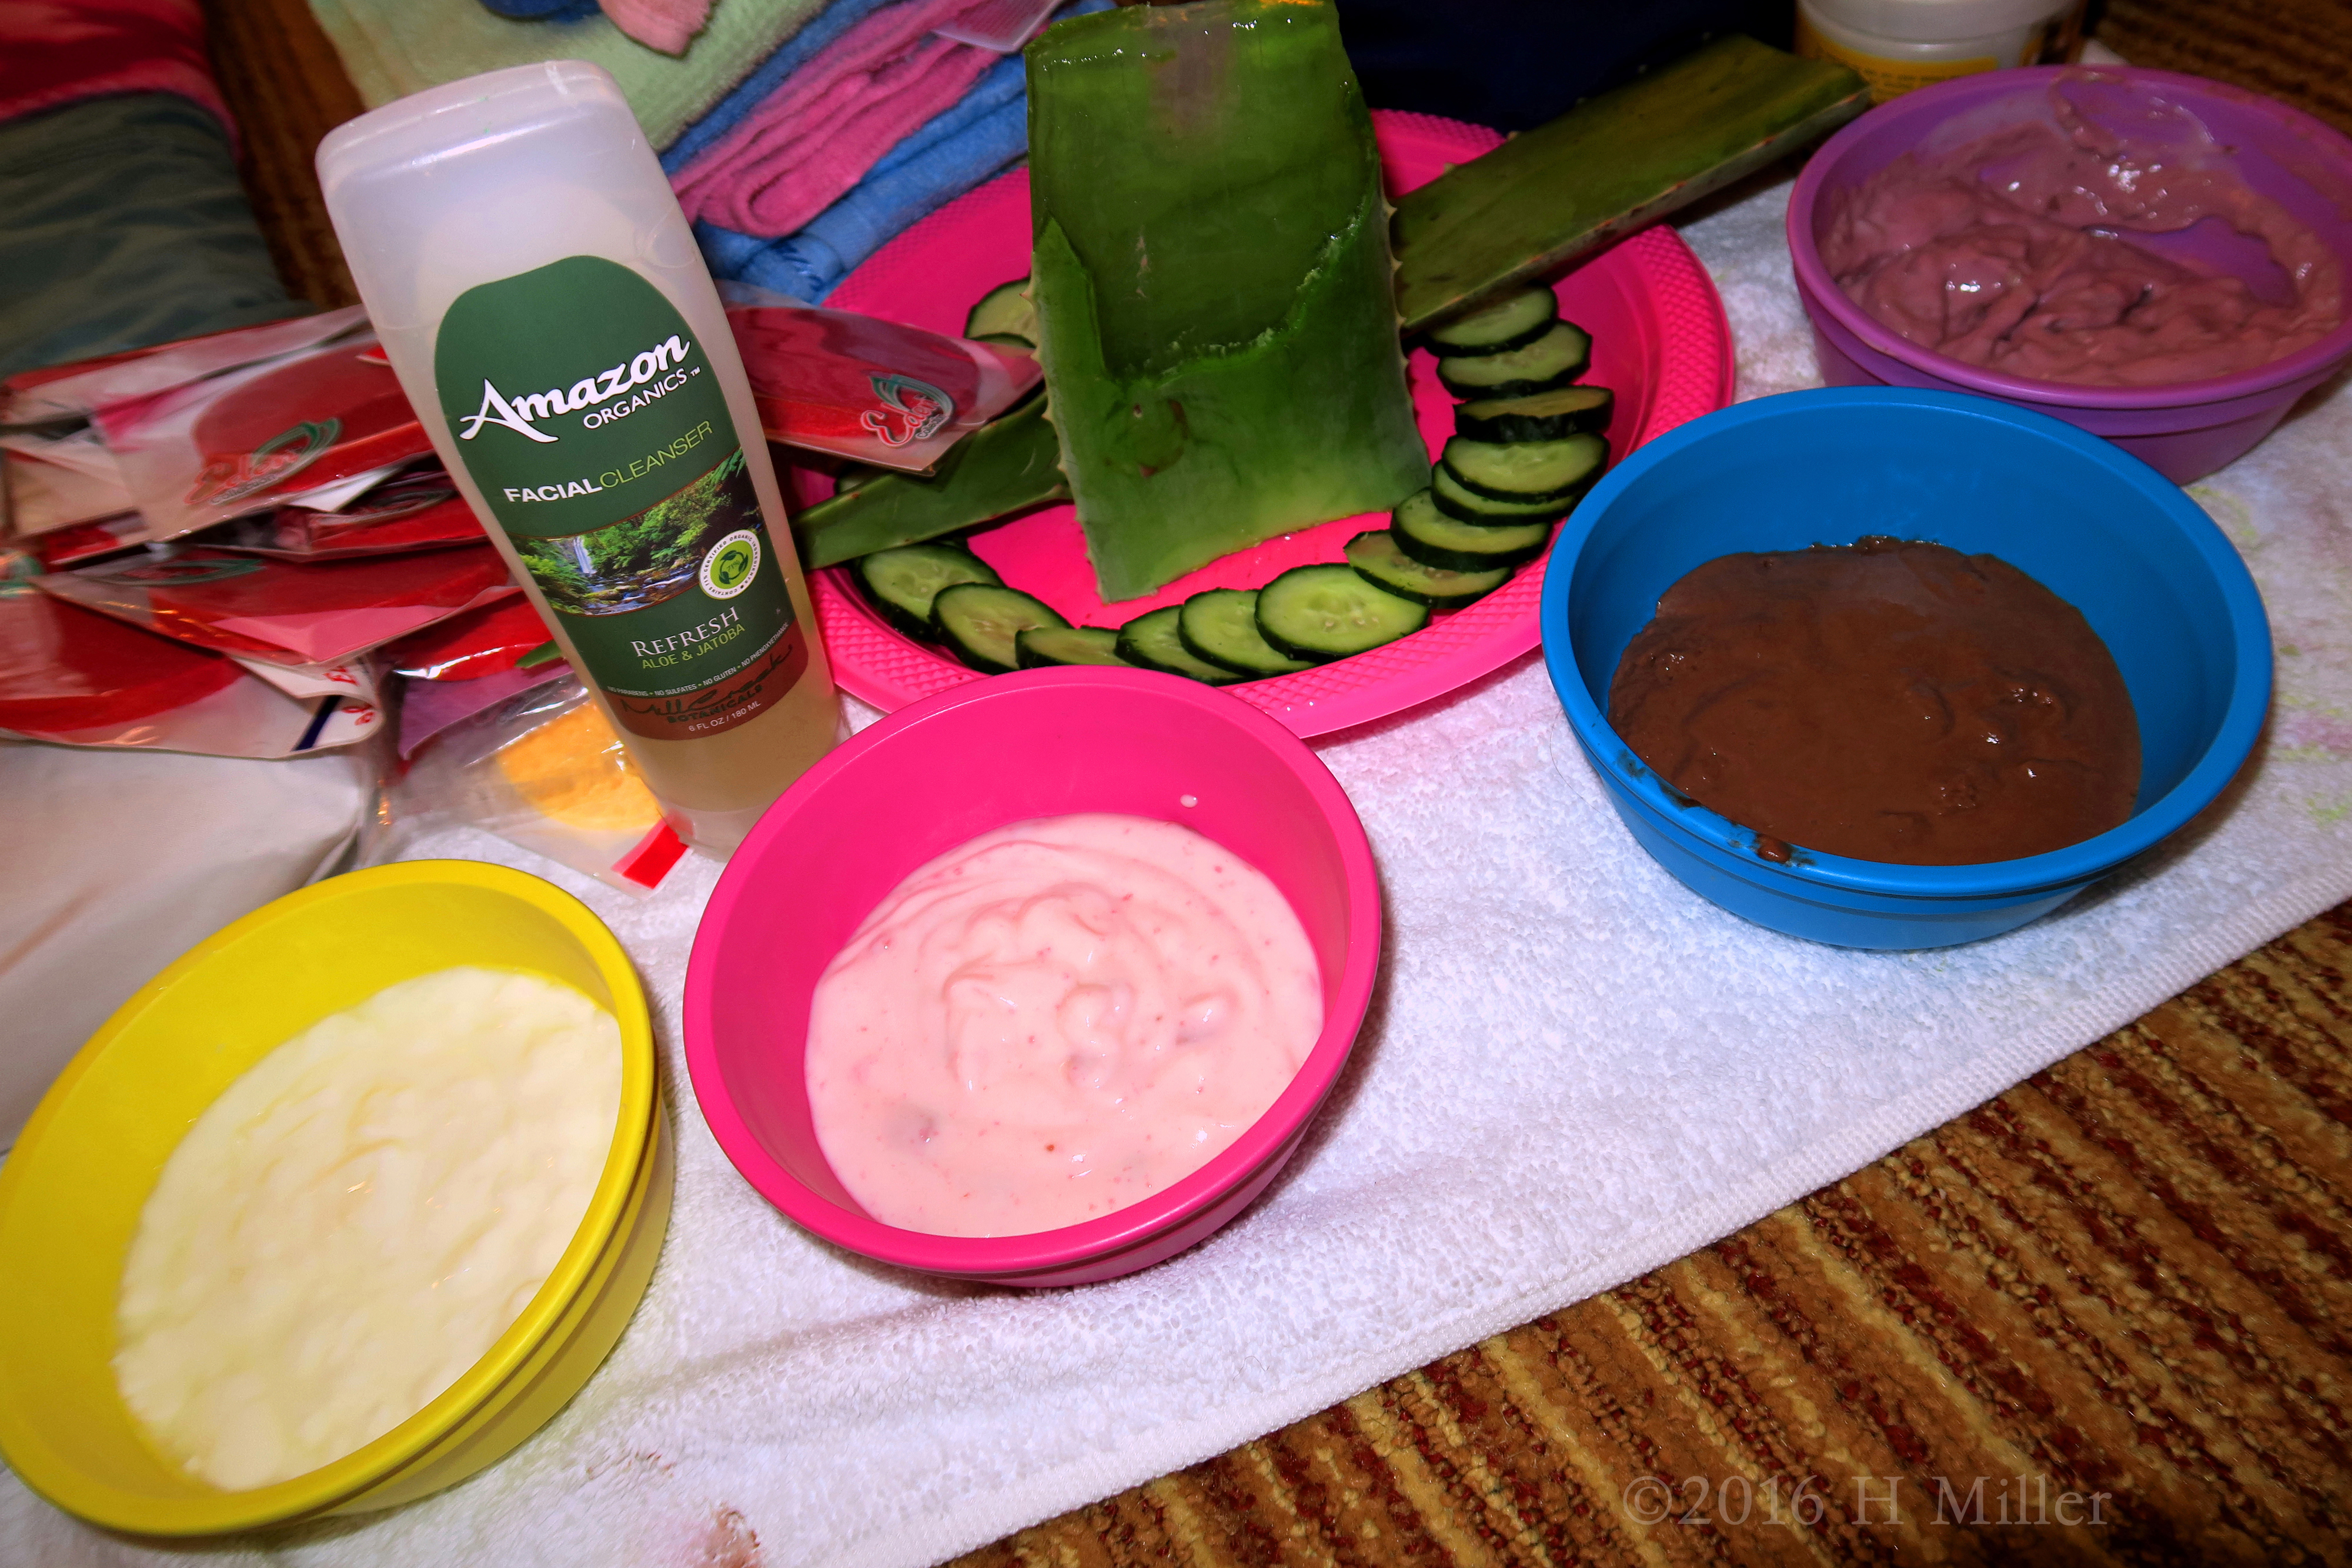 Kids Facial Mask Choices Include Blueberry, Chocolate, Vanilla, And Strawberry! Note The Fresh Aloe Leaf And Cuke Slices. 